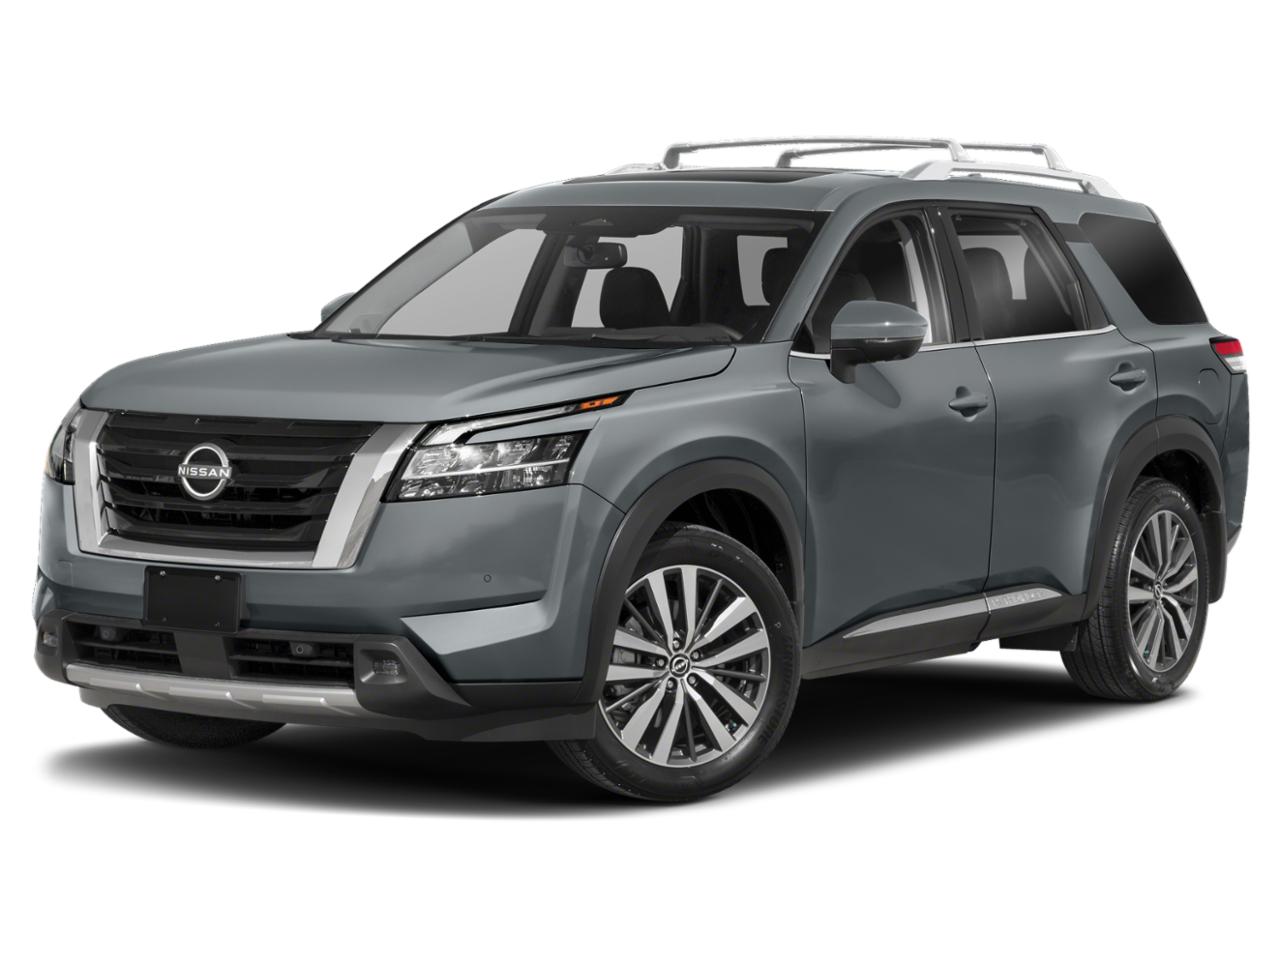 New 2024 Nissan Pathfinder Vehicles at Billion Nissan of Sioux Falls